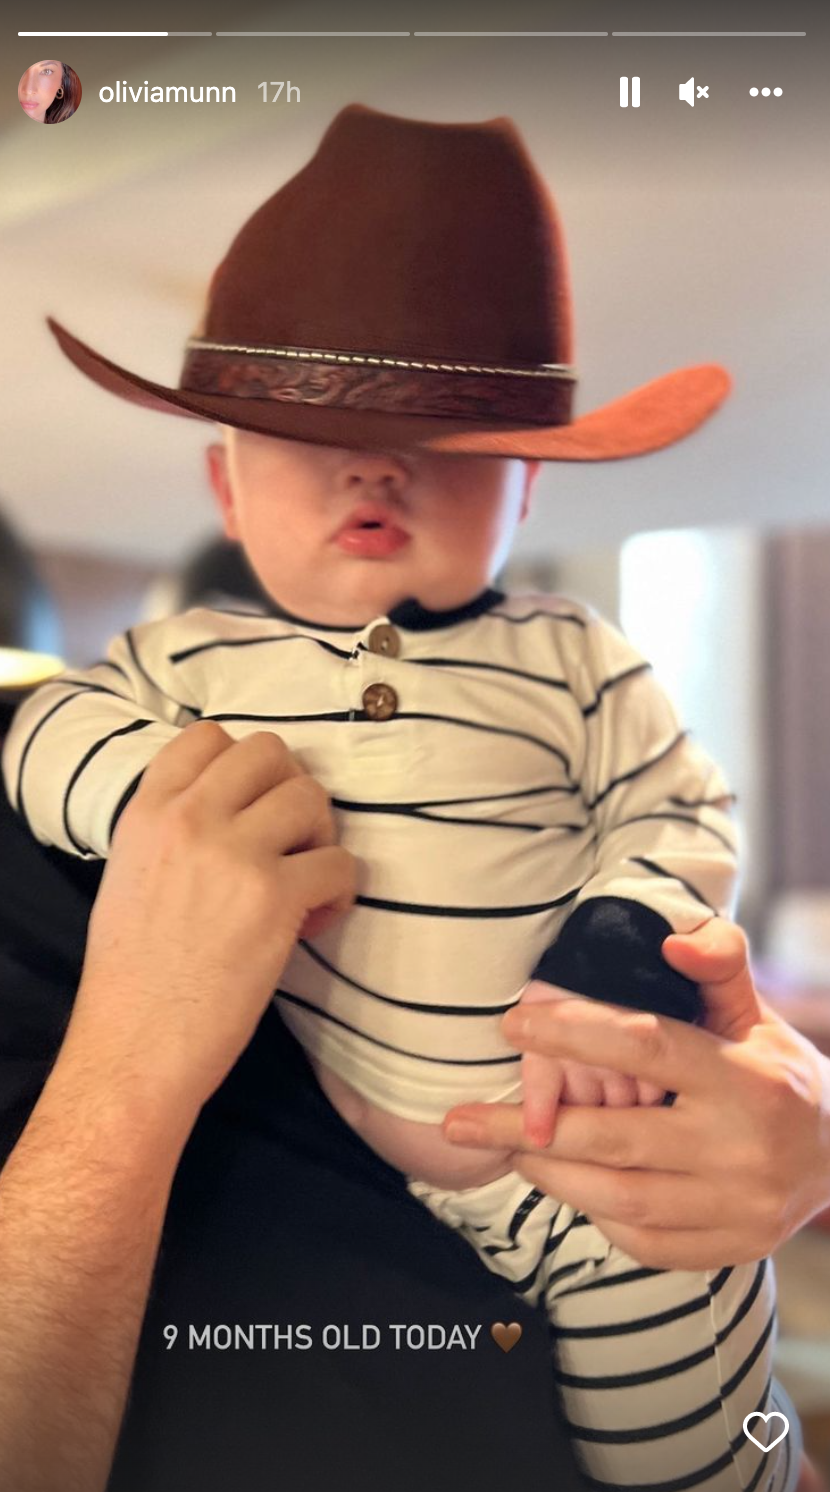 Nine-month old Malcolm wears a striped pajama set and wears an oversized cowboy hat that covers his eyes. He's being held by an adult that's not in frame. Olivia Munn and John Mulaney's baby.